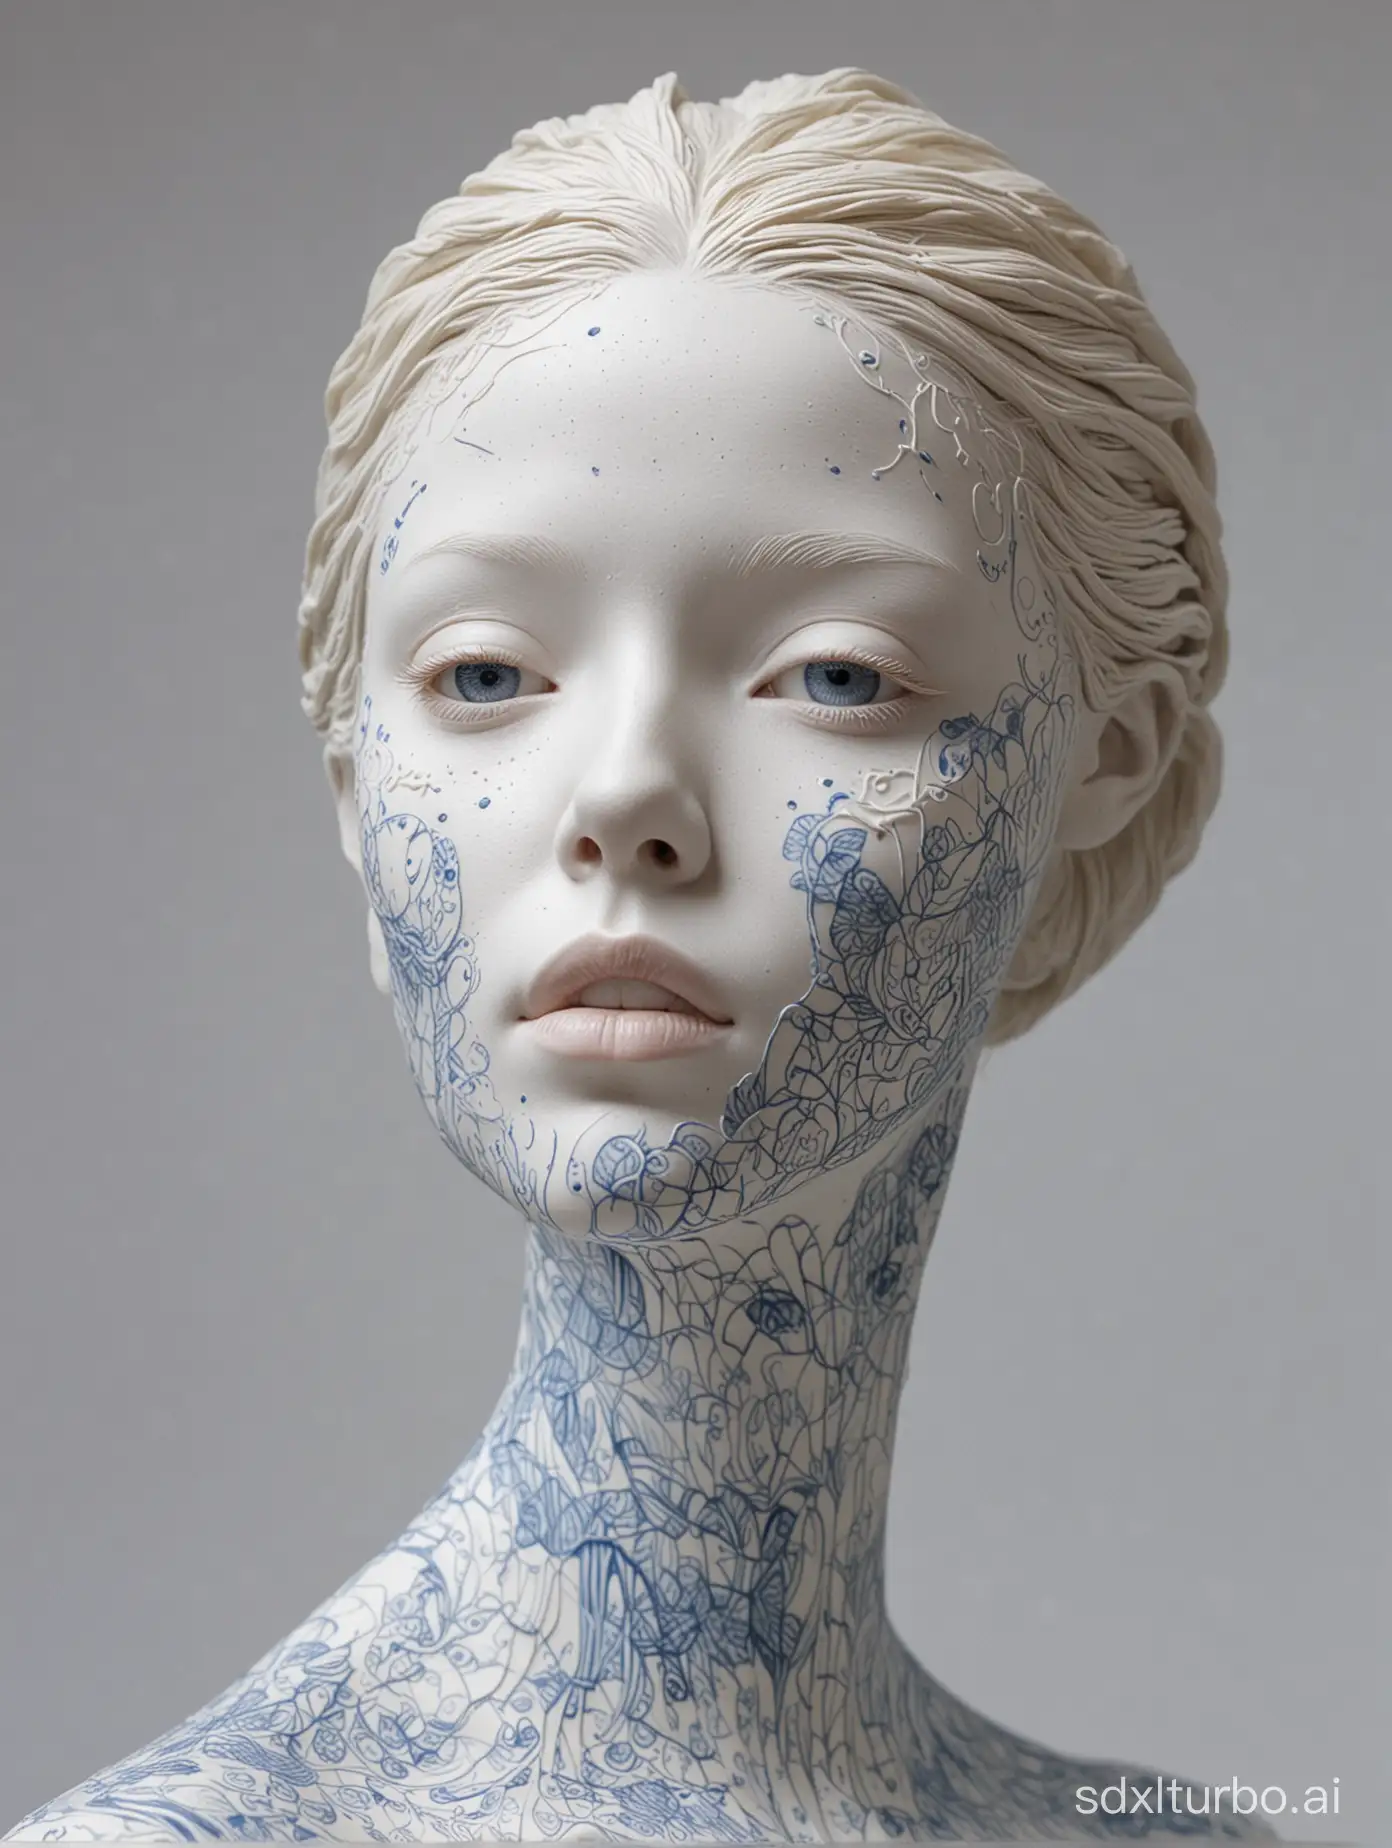 Elegant-Porcelain-Woman-Sculpture-in-White-and-Blue-with-Intricate-Facial-Details